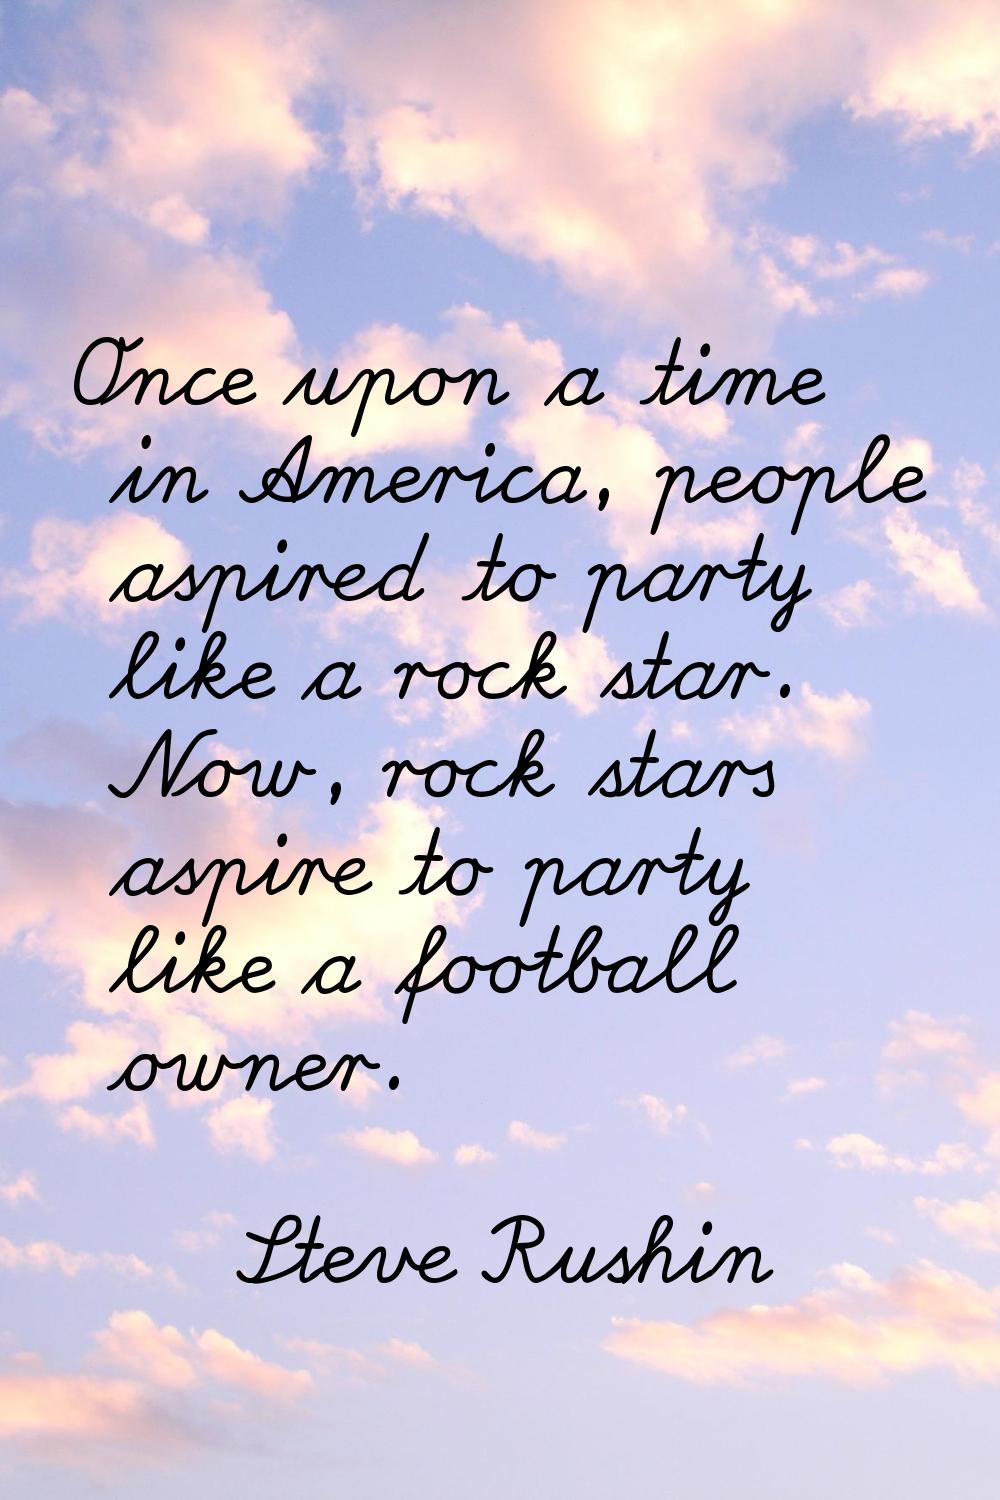 Once upon a time in America, people aspired to party like a rock star. Now, rock stars aspire to pa